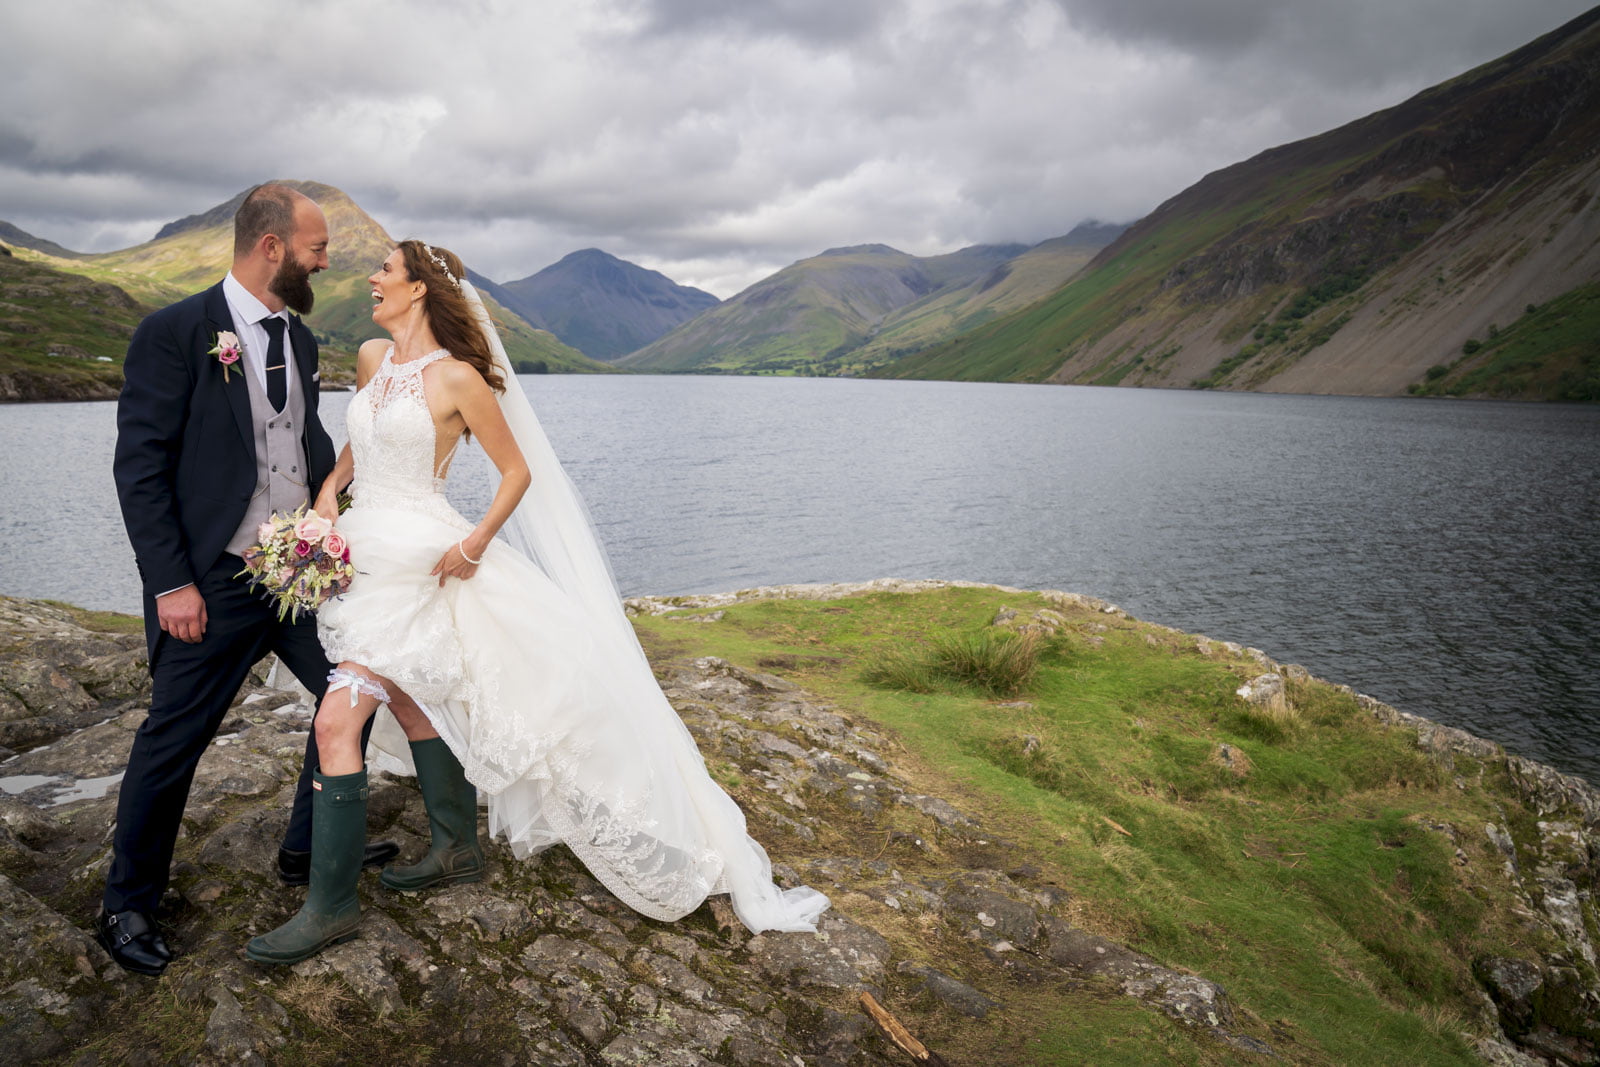 A stunning, quirky portrait in the natural beauty of the Lake District